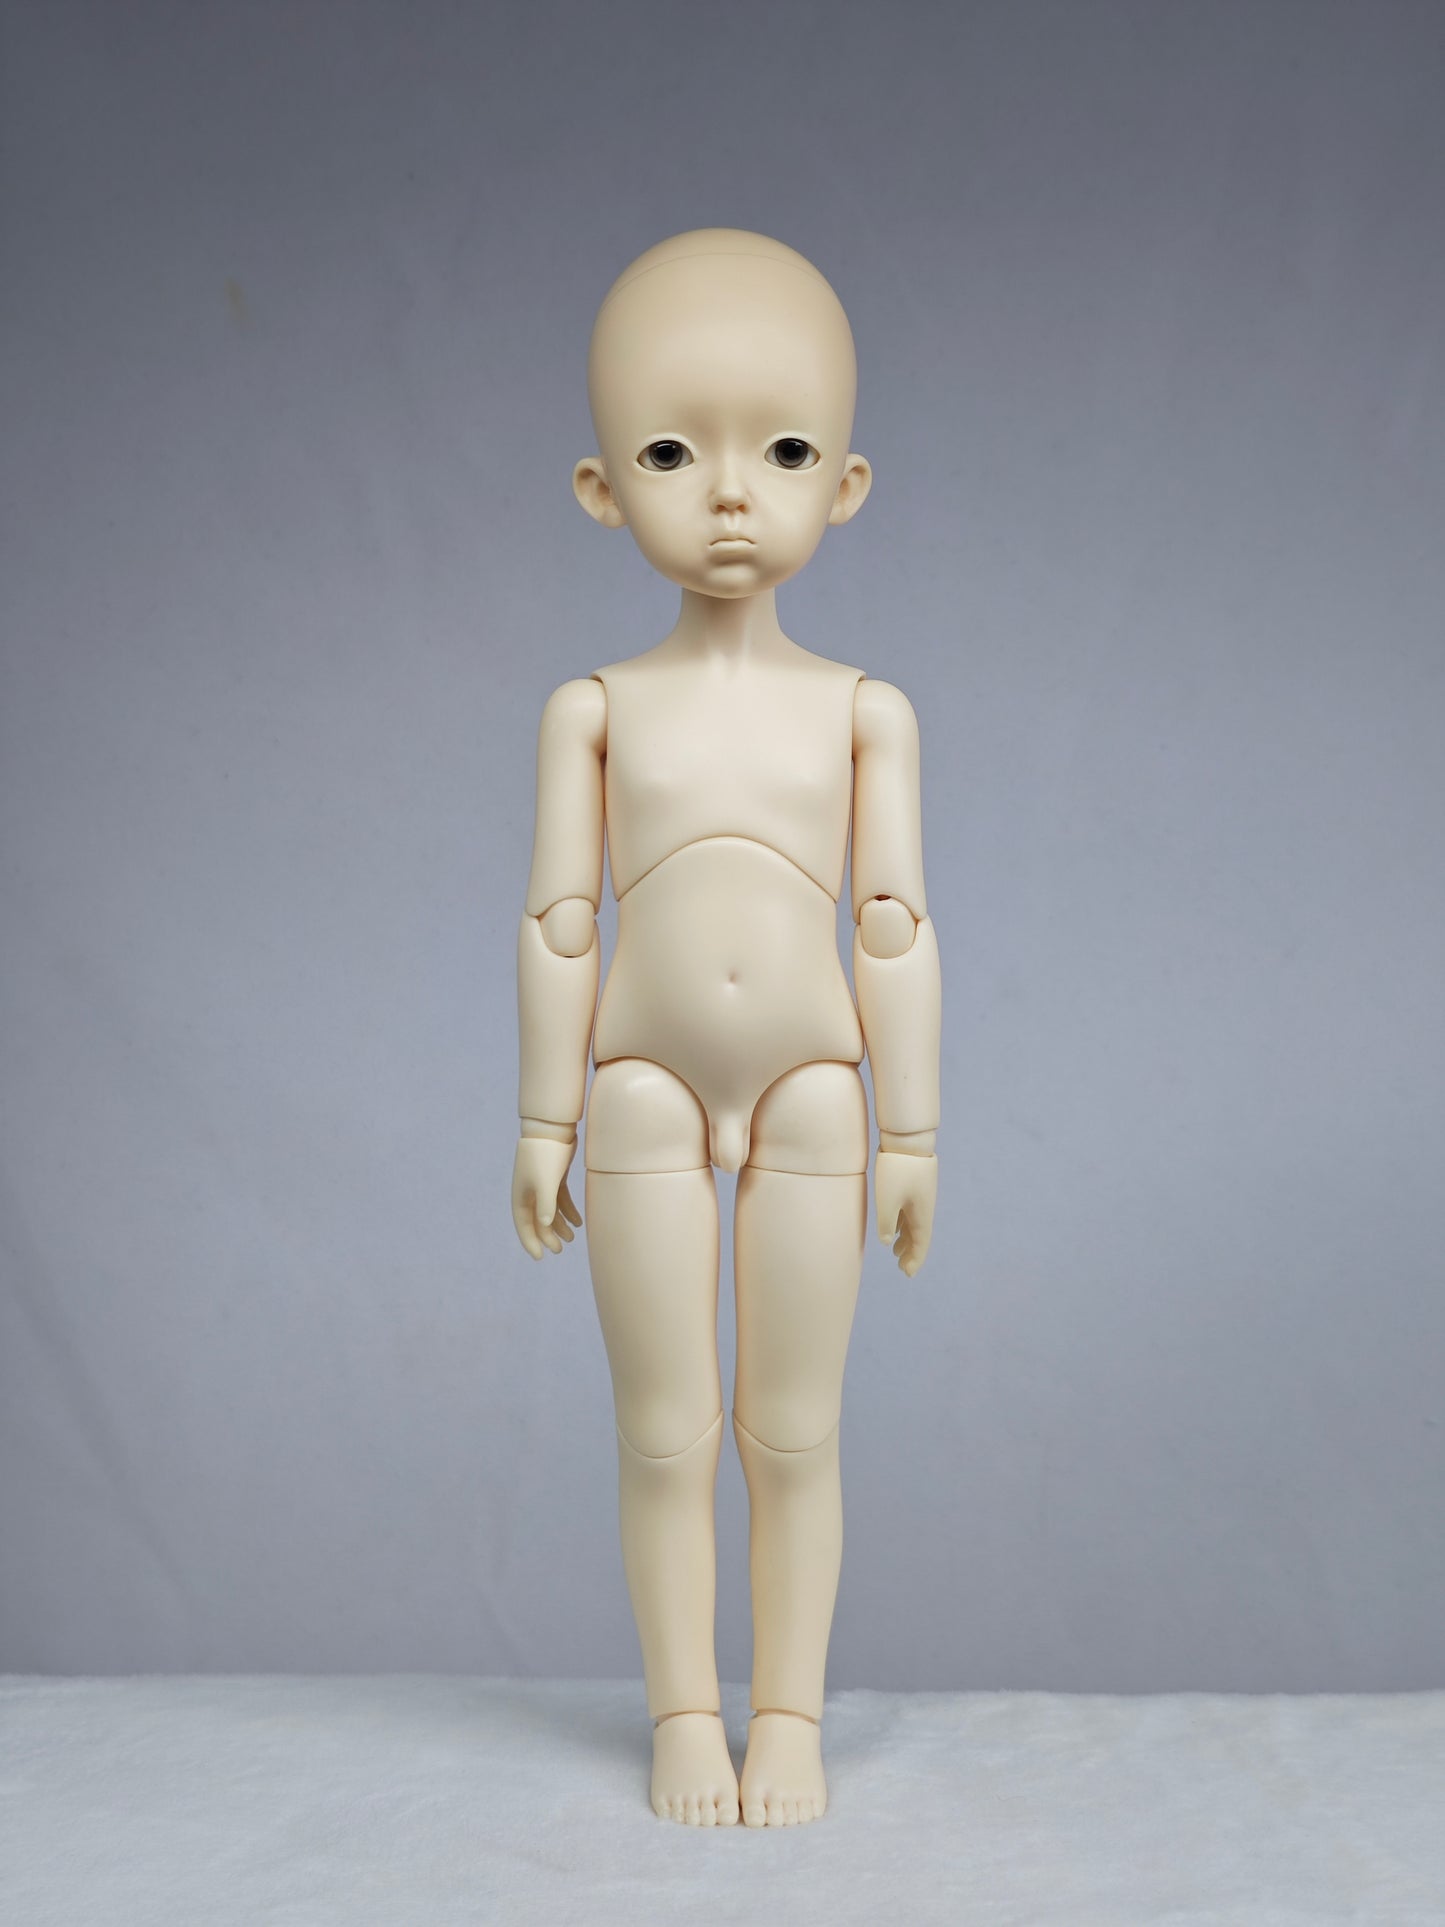 1/6 30cm boy doll Ray in normal skin with clothes